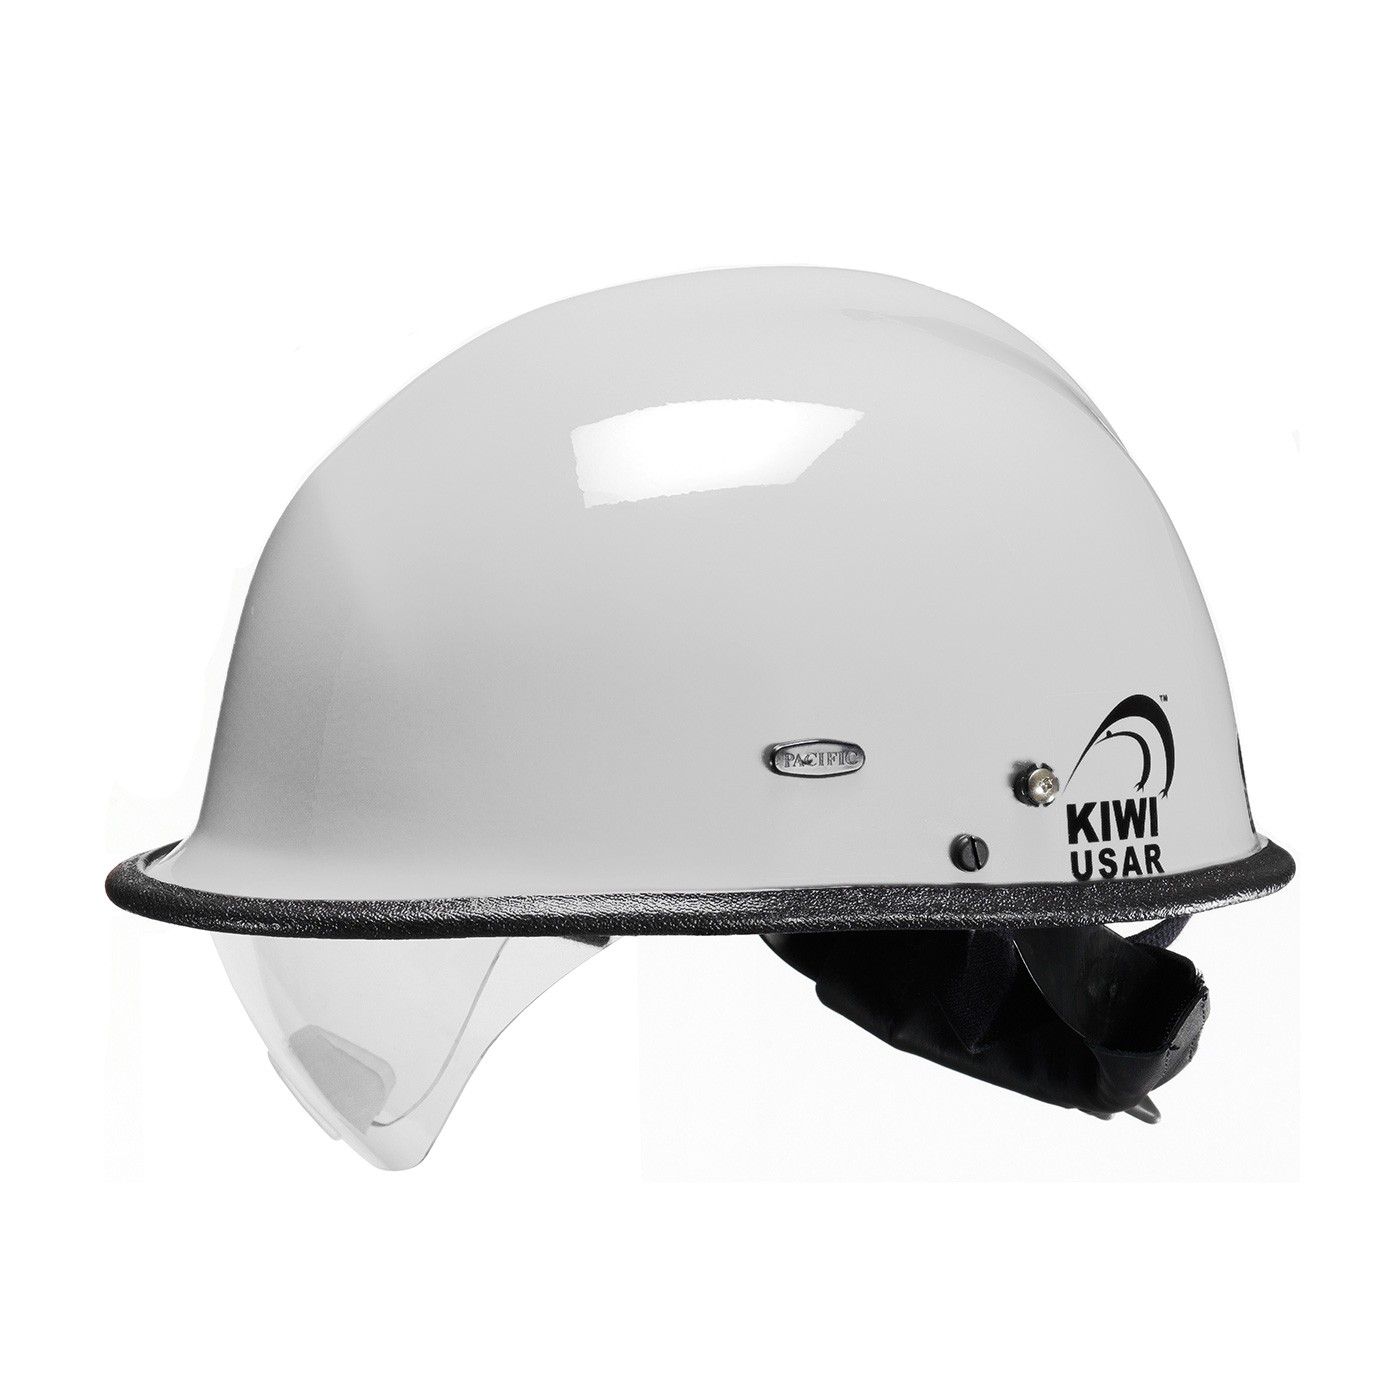 R3V4 KIWI USAR™ Rescue Helmet with ESS Goggle Mounts and Retractable Eye Protector  (#804-340X)